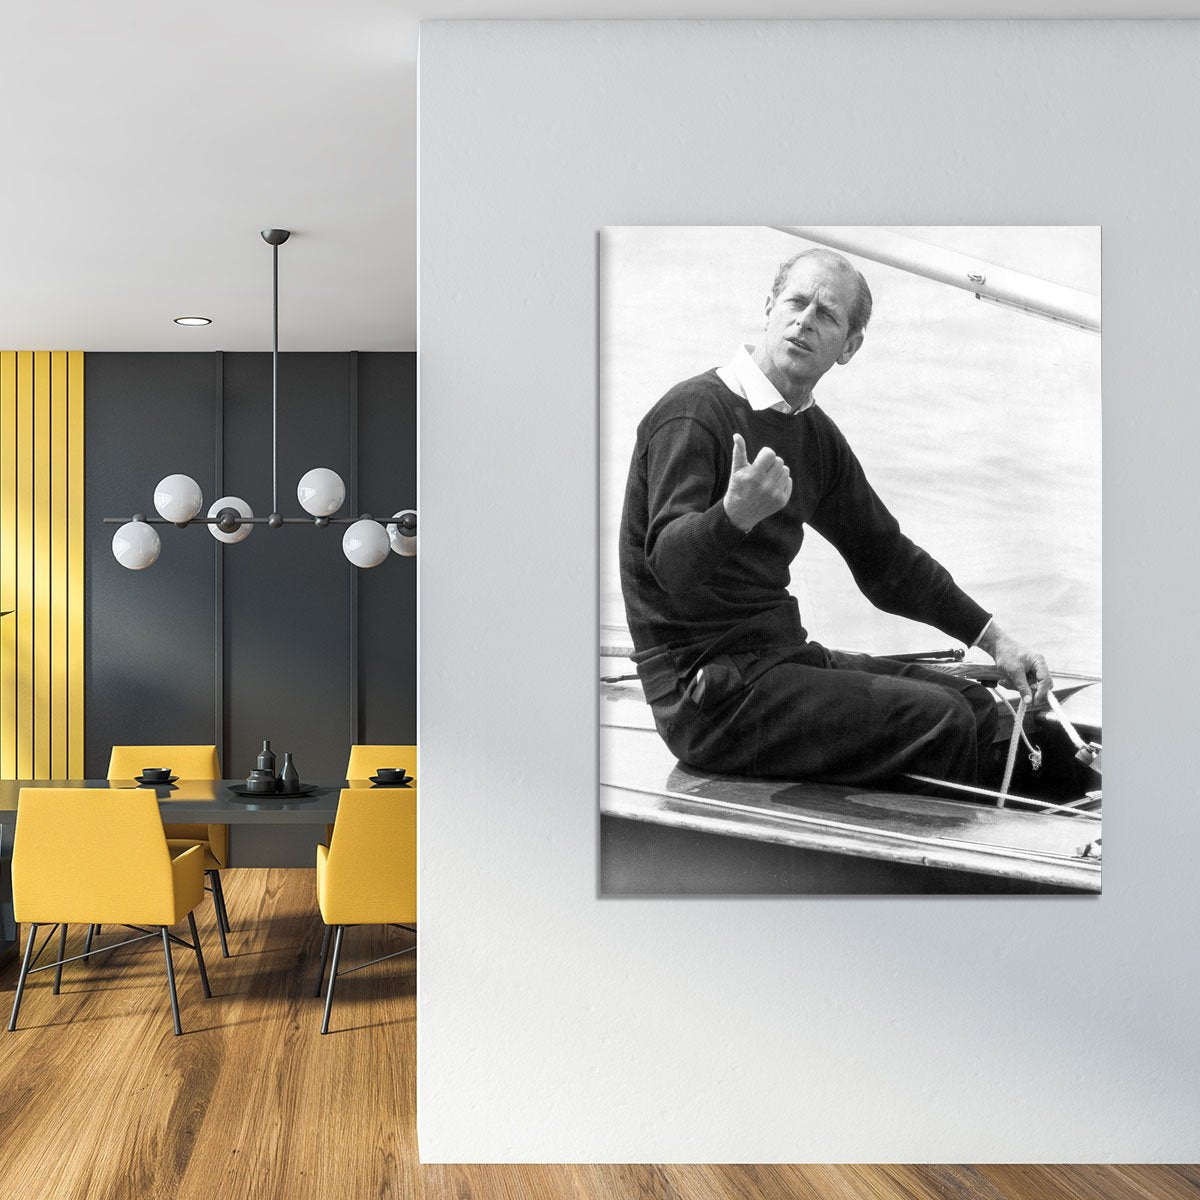 Prince Philip resting after racing at Cowes Isle of Wight Canvas Print or Poster